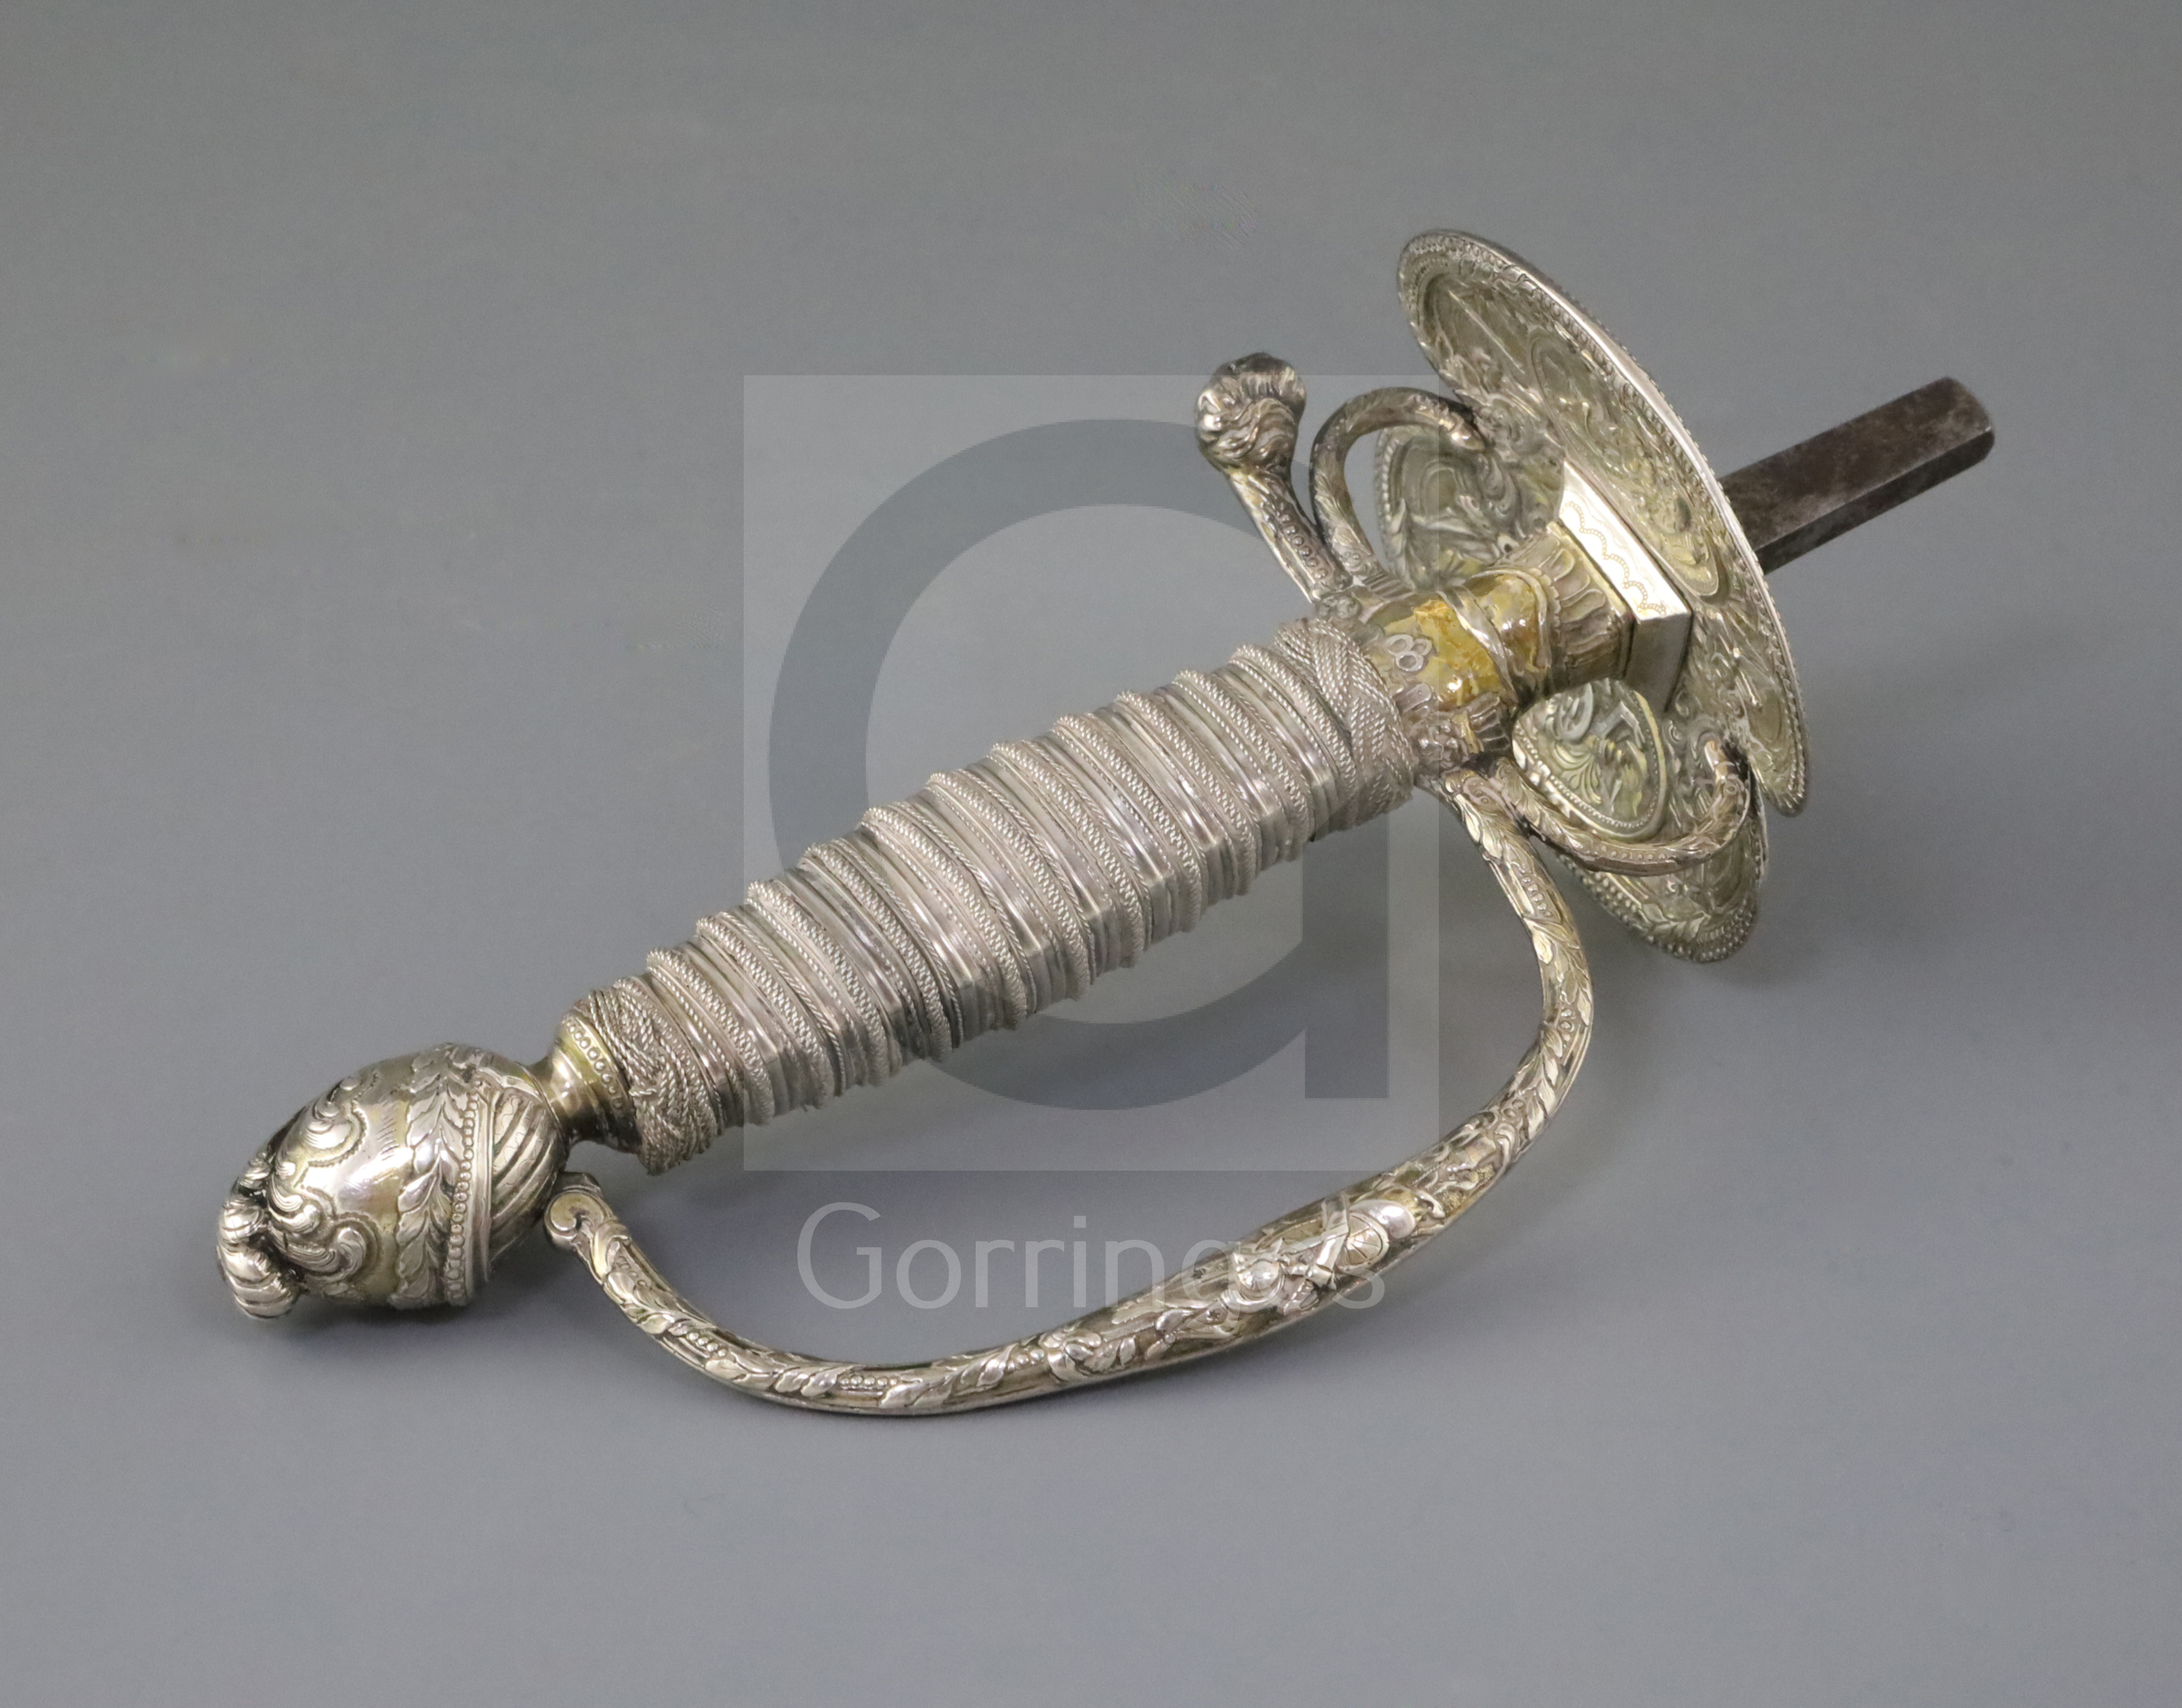 A 19th century Continental silver gilt sword hilt, decorated with military trophies, a helm and